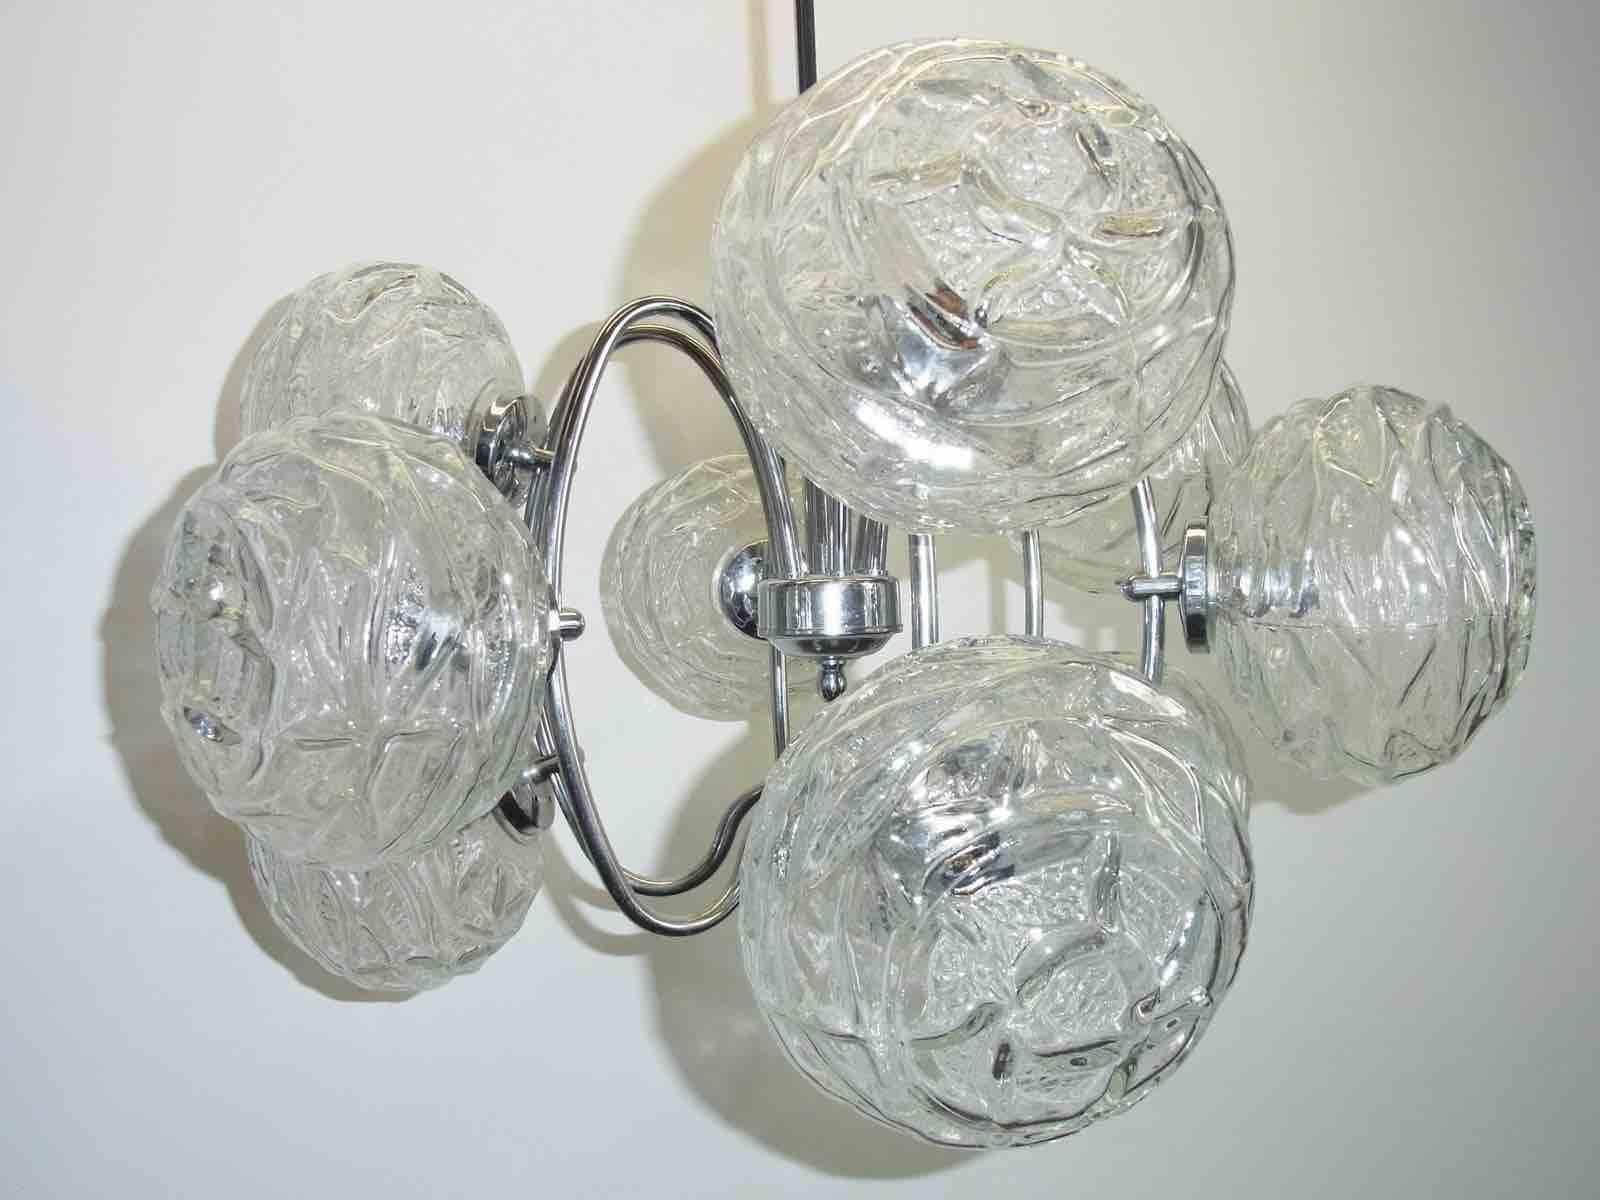 Mid-20th Century German Mid-Century Modern Polished Chrome and Glass Ball Chandelier For Sale